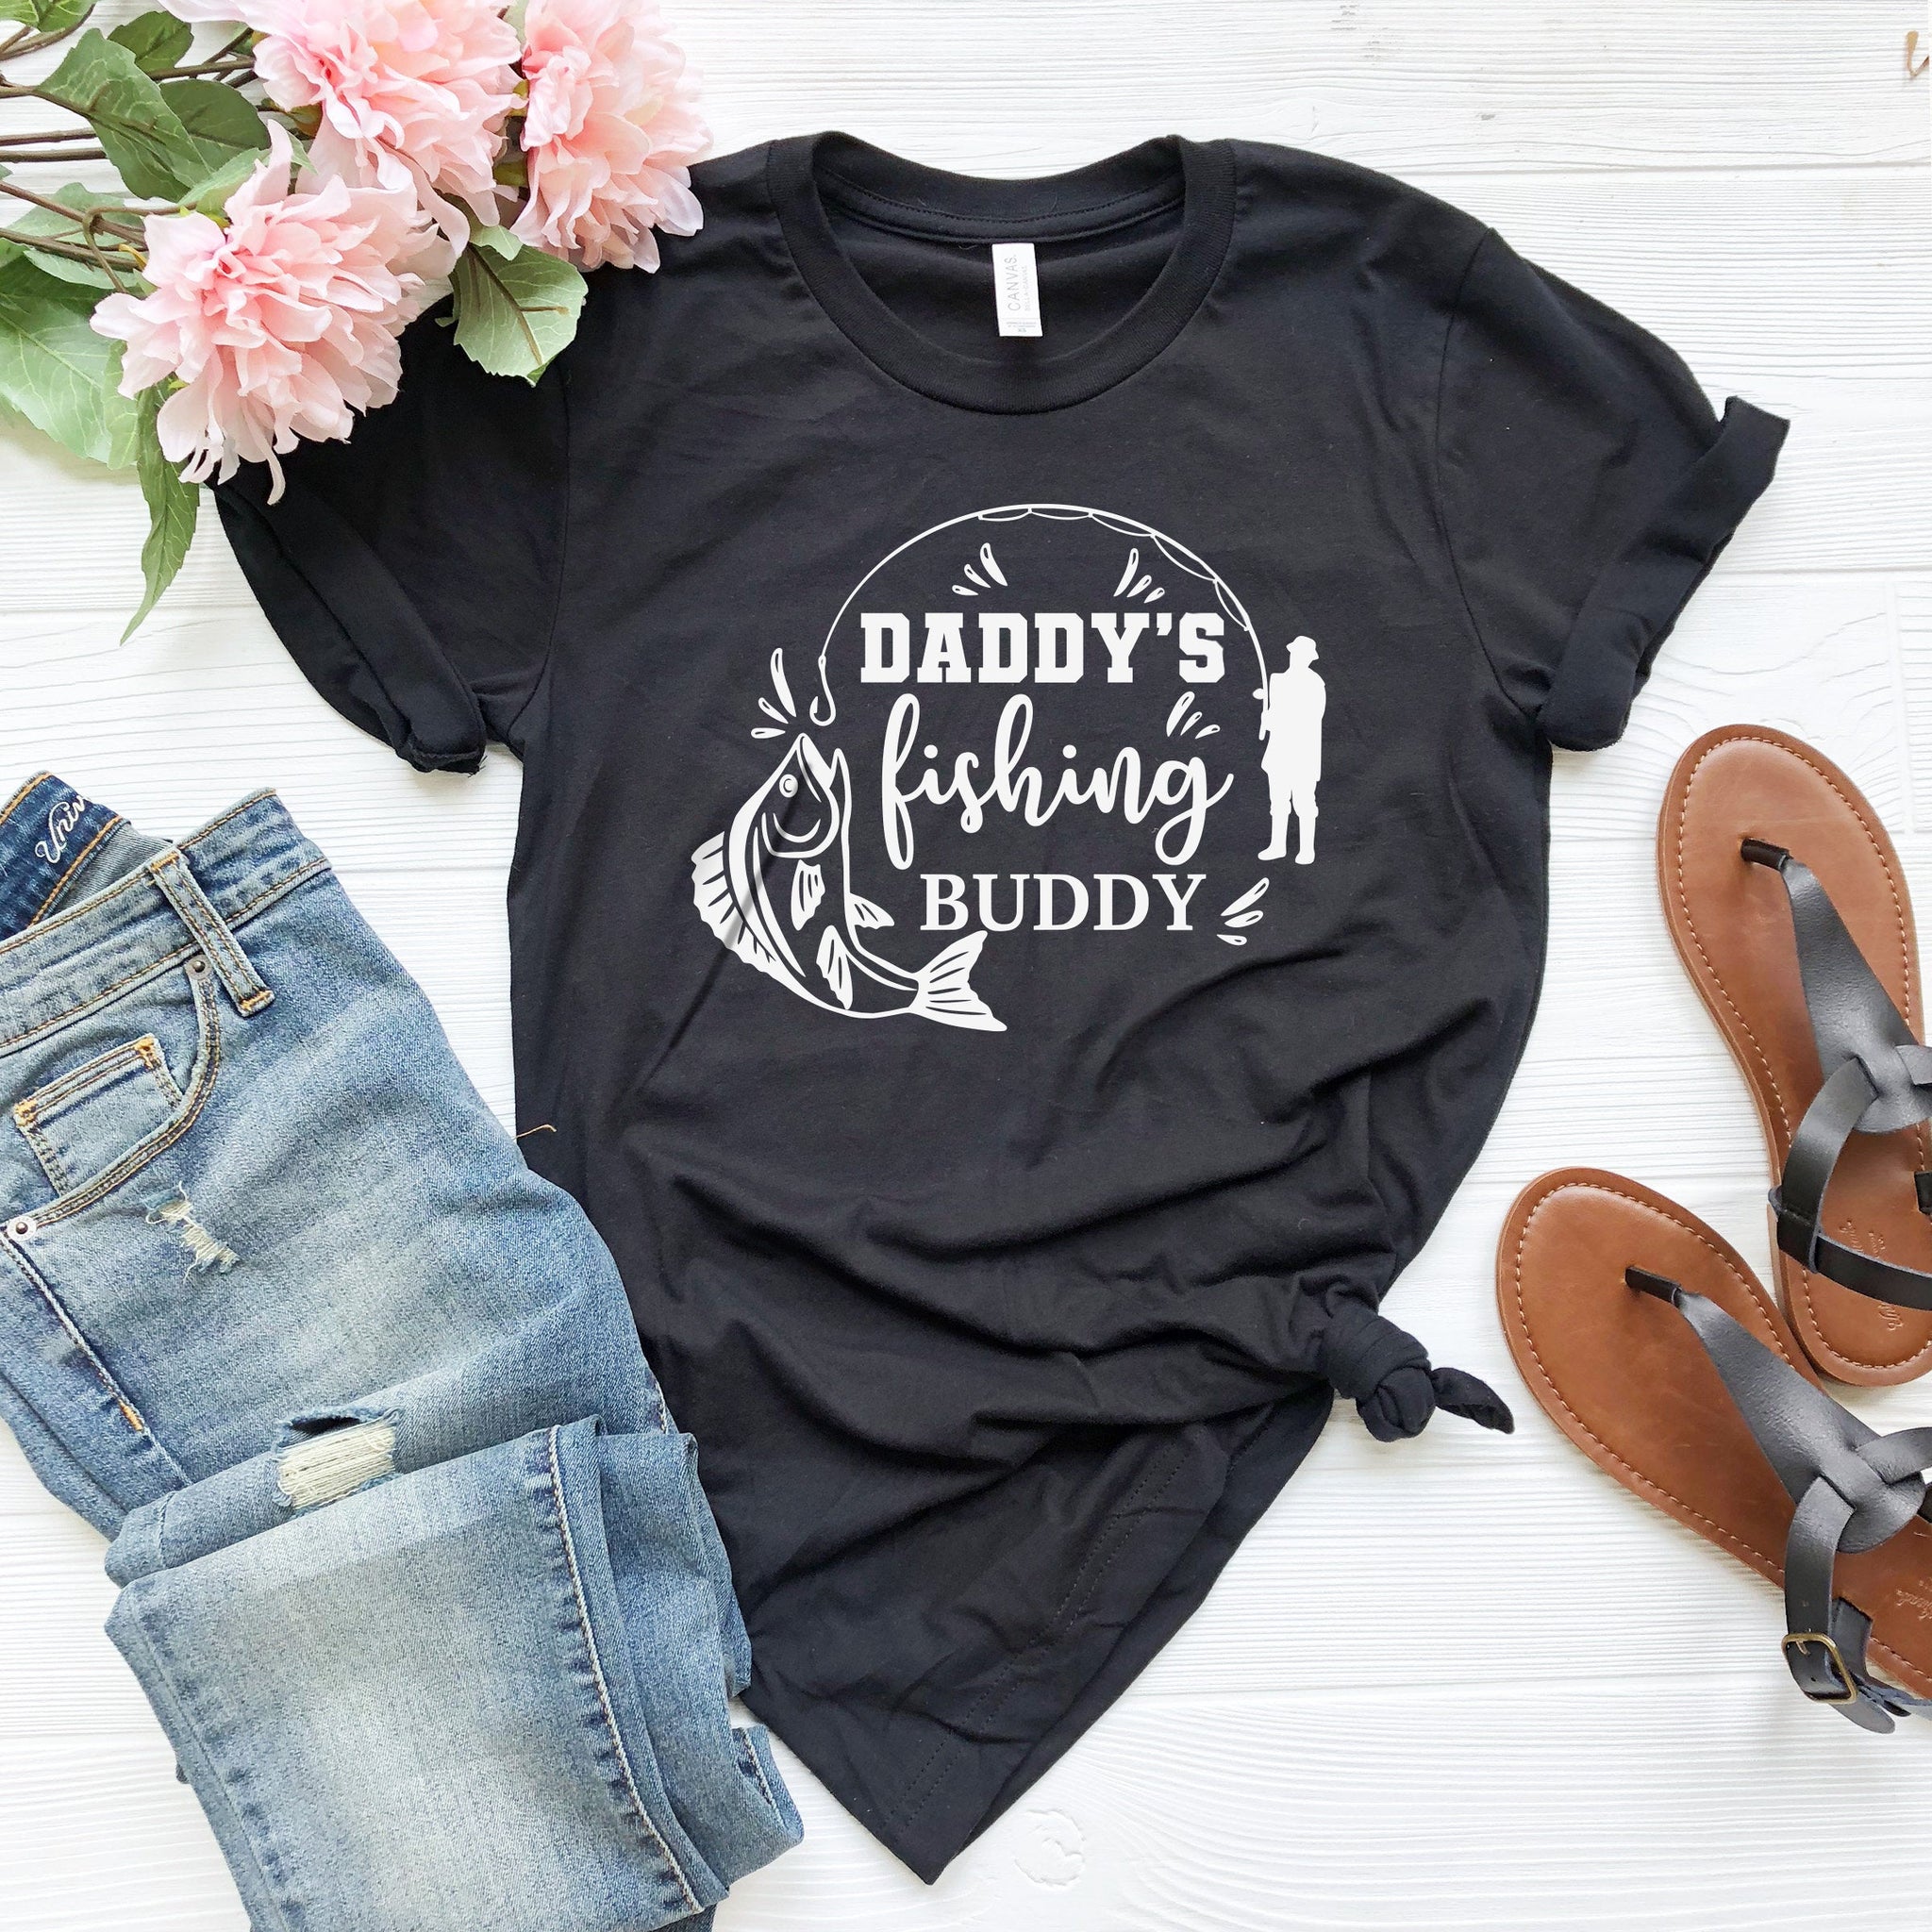 Funny Dad Tshirts for Fathers Day, Dad gift shirts, Dad shirts from da –